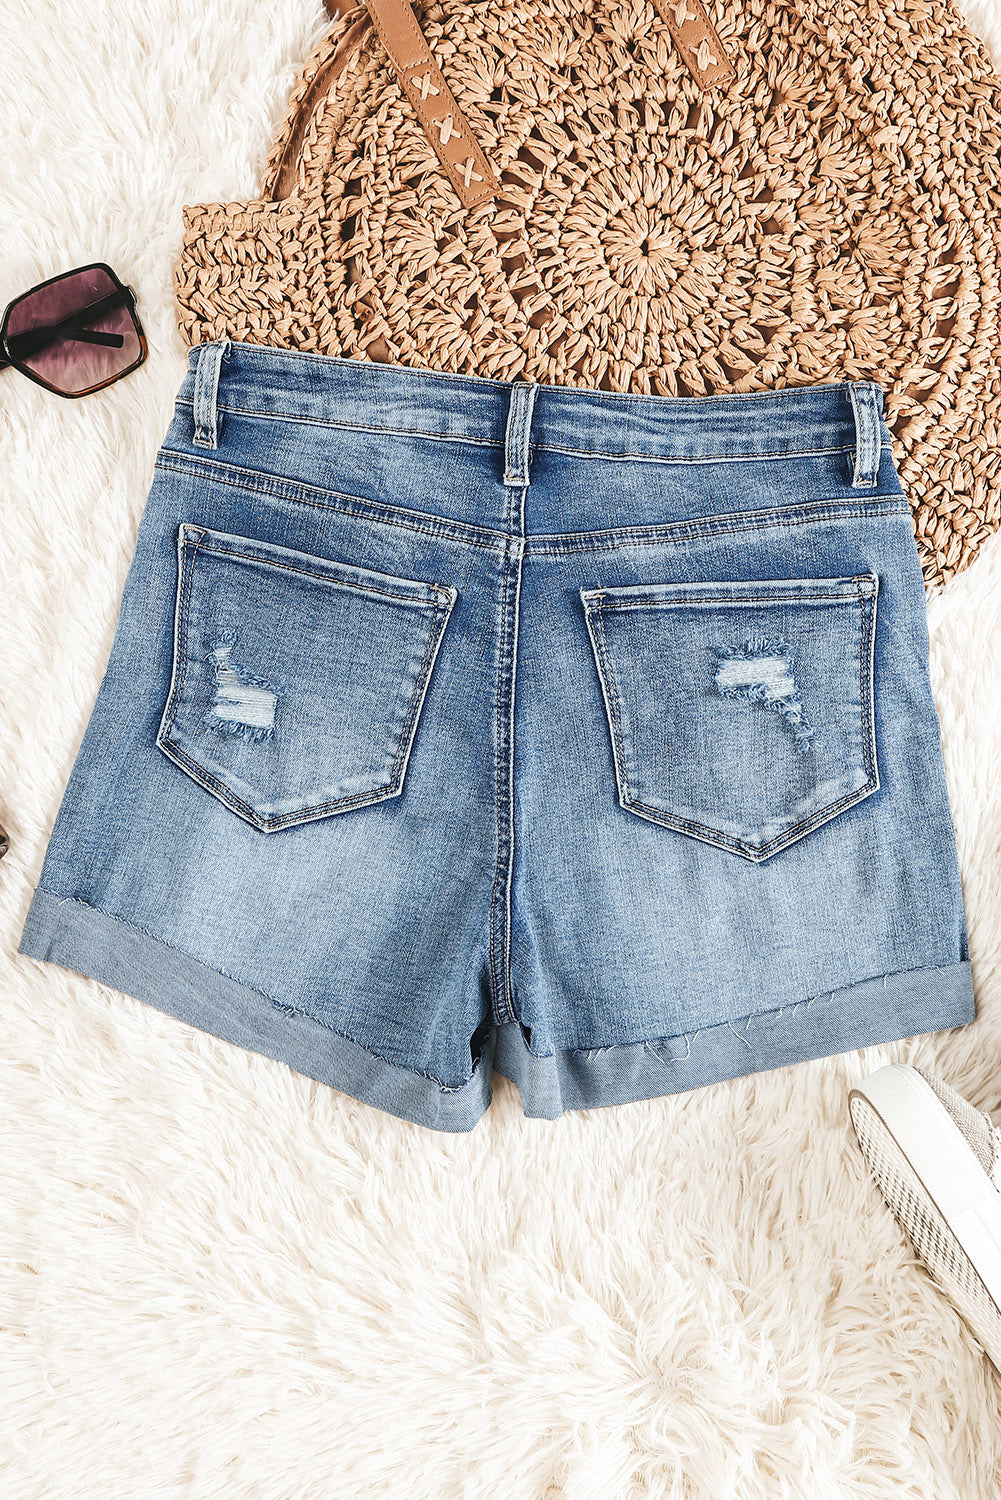 Light Blue Button Fly Distressed High Rise Denim Shorts